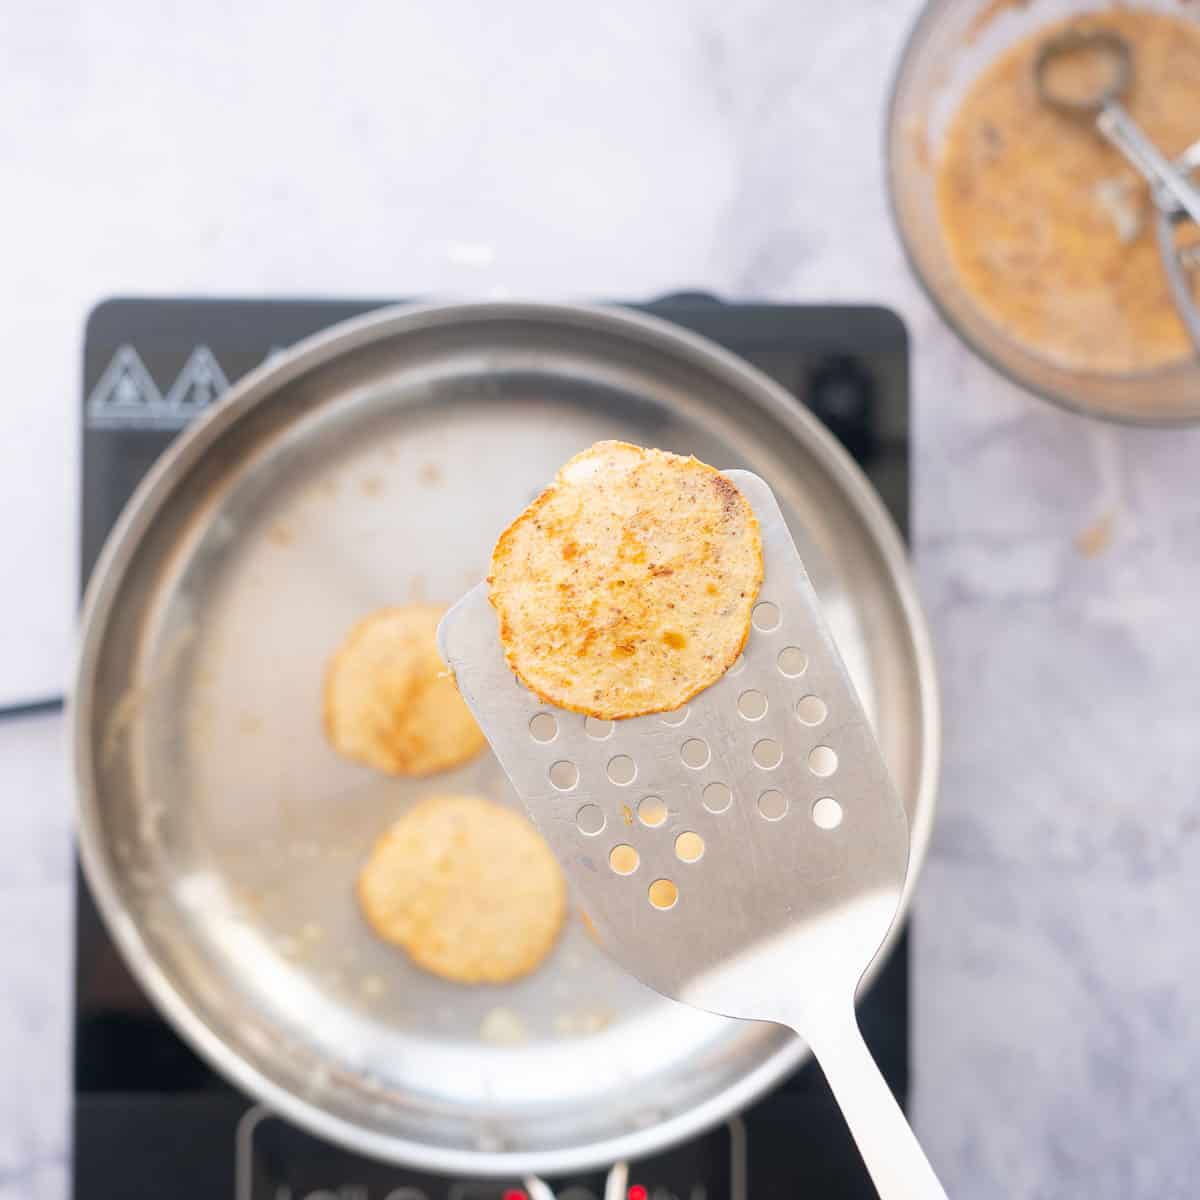 A small golden cooked pancake being lifted on a stainless steel spatula. 